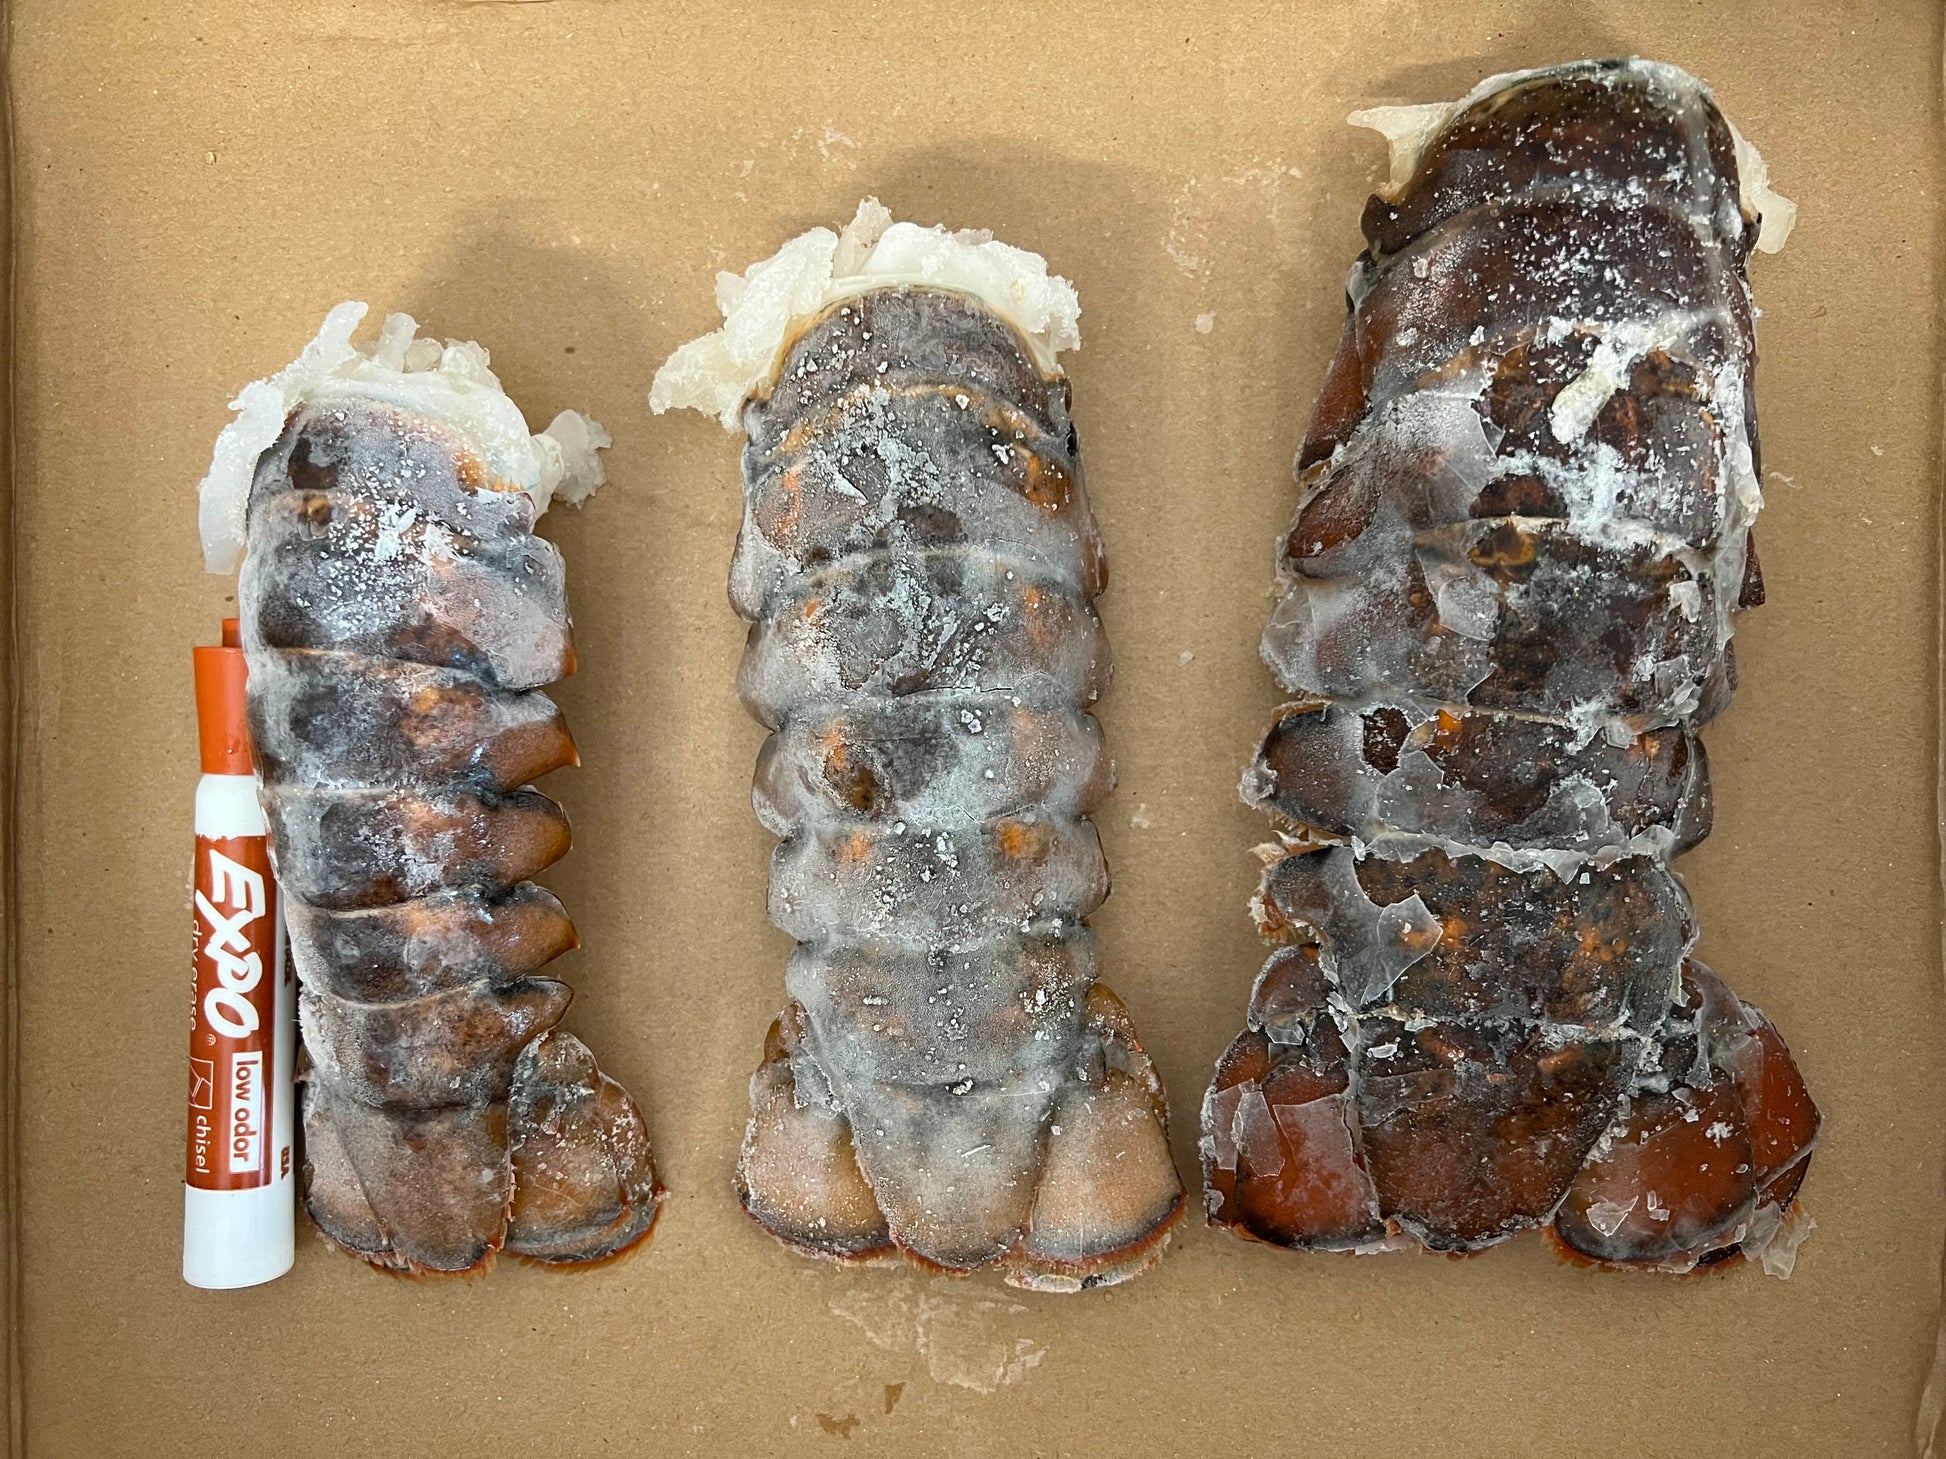 WILD 8-10 oz. Canadian Lobster tails